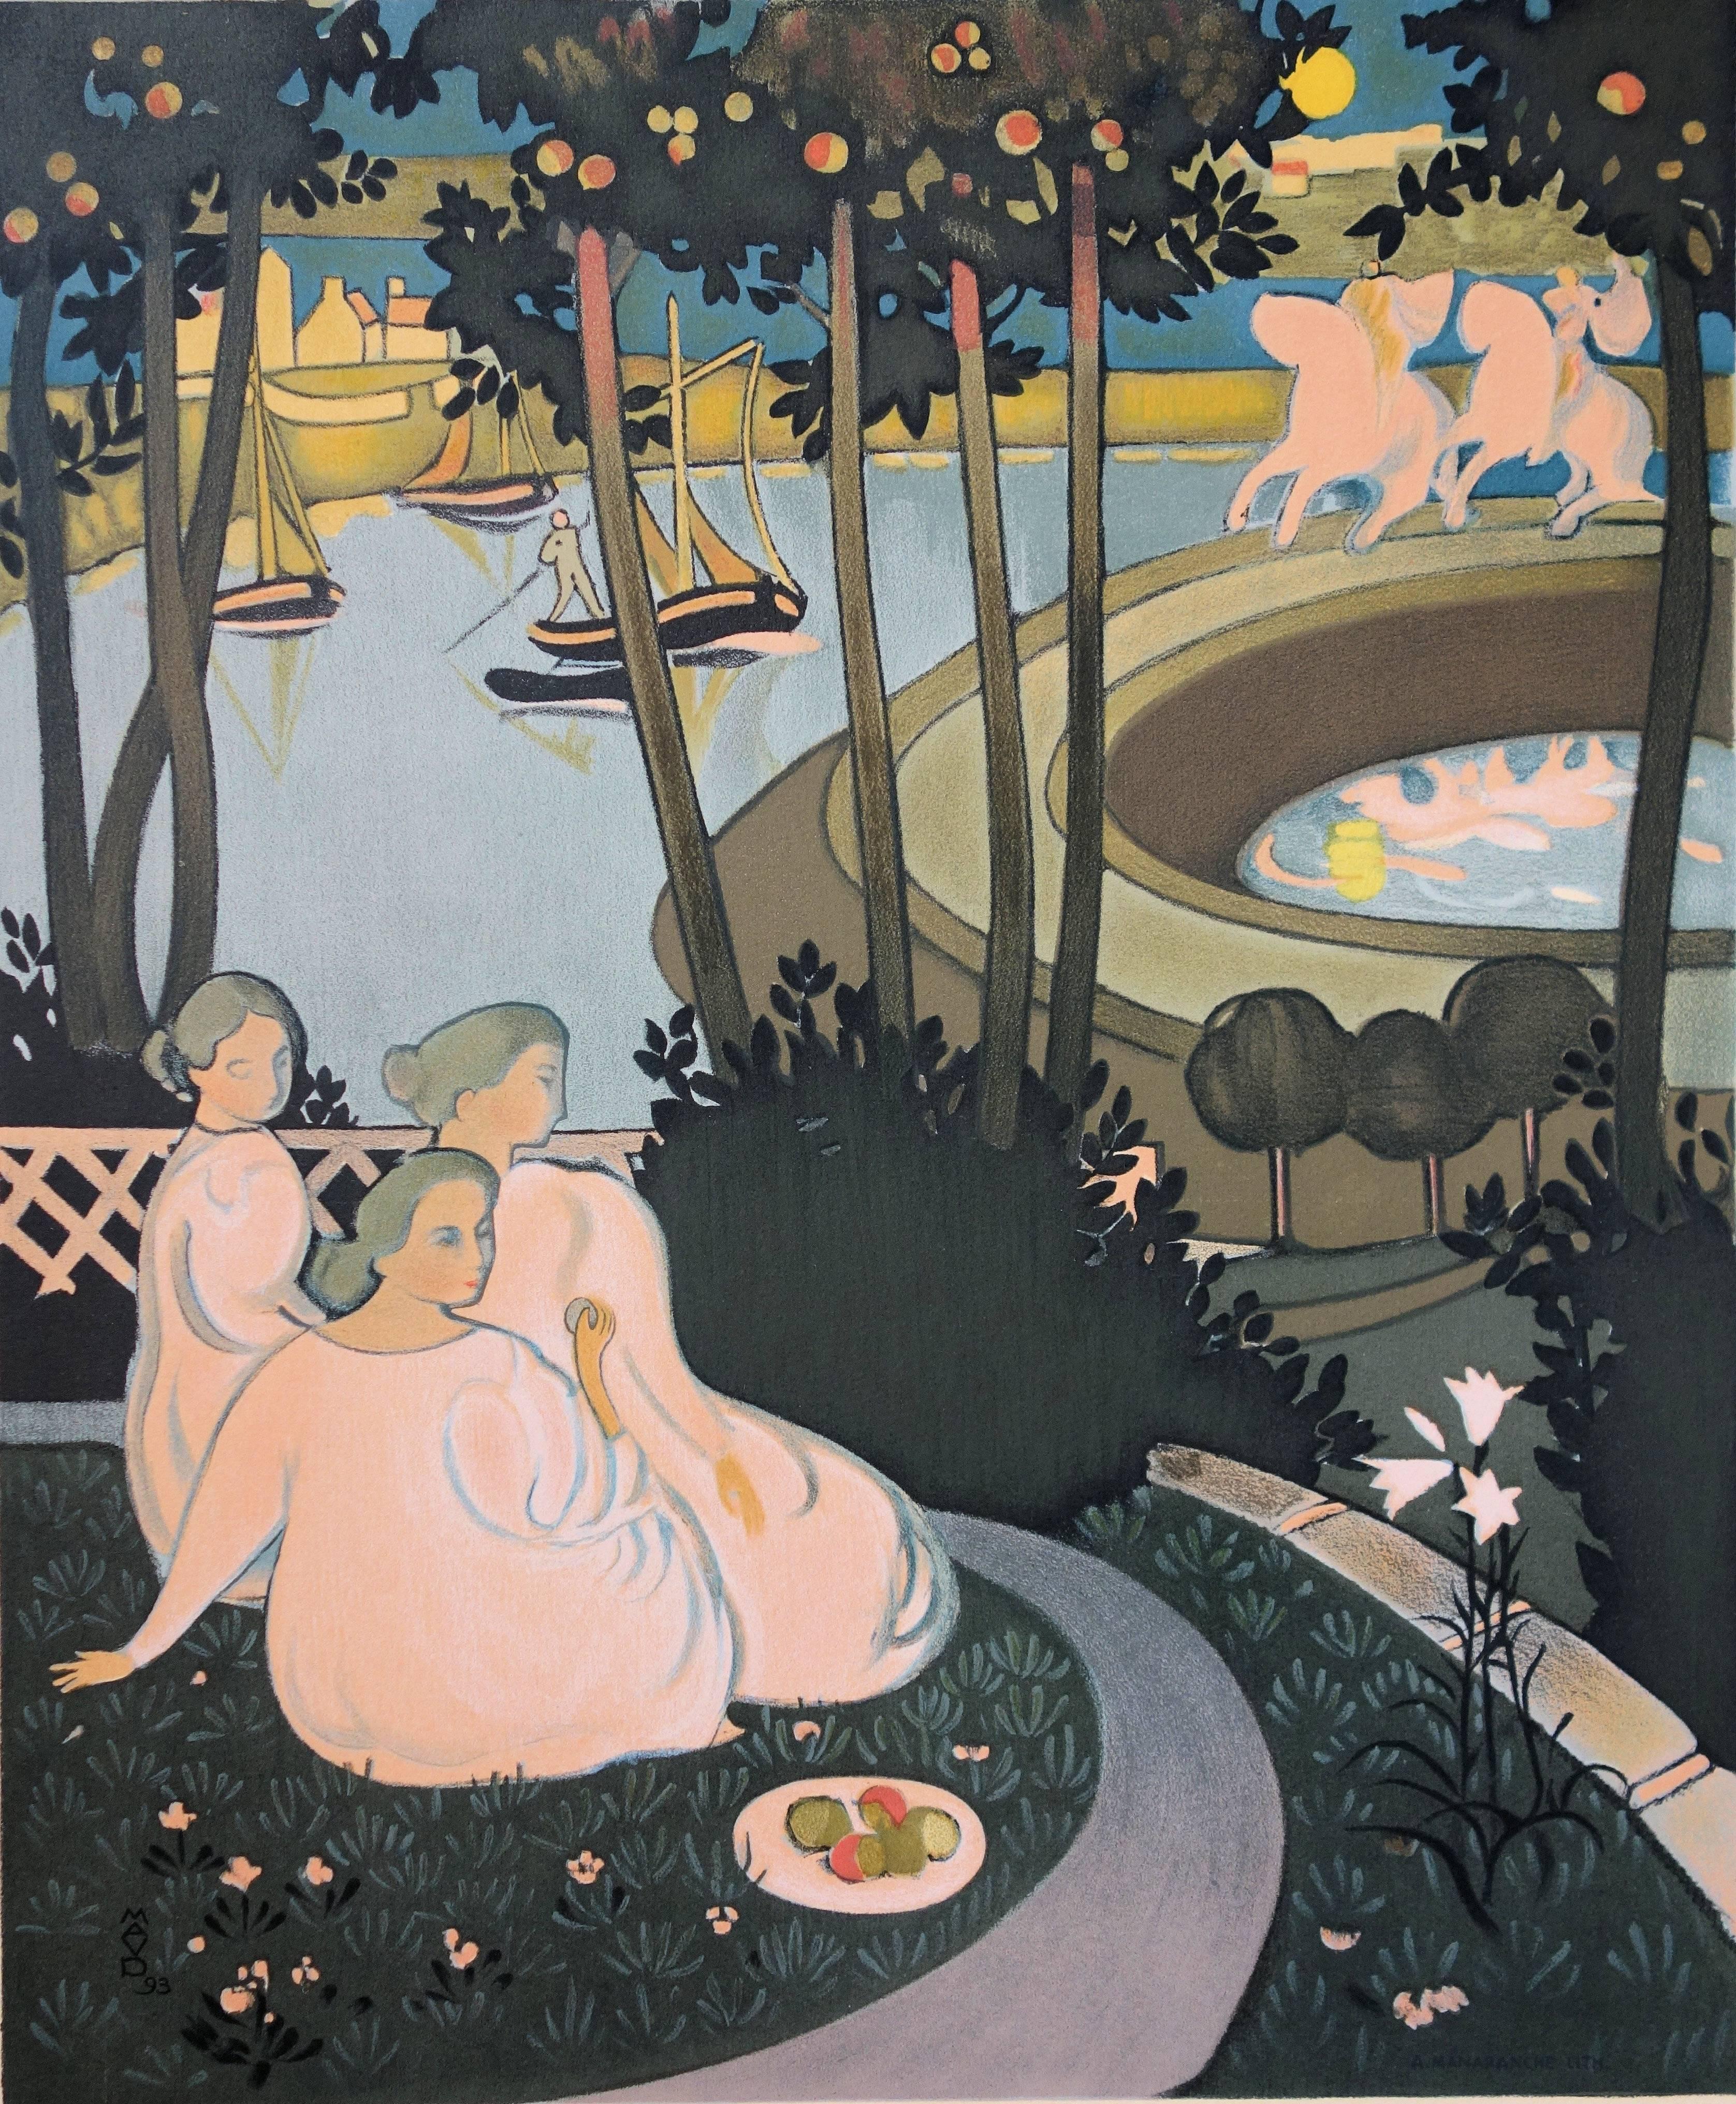 Maurice Denis
The Symbolist Park

Stone lithograph engraved by Manaranche
Printed signature bottom left
Dated (18)93
Numbered in pencil 22/350
On Arches vellum mounted on light board 56 x 48 cm (c. 22 x 19 in)

Excellent condition, light